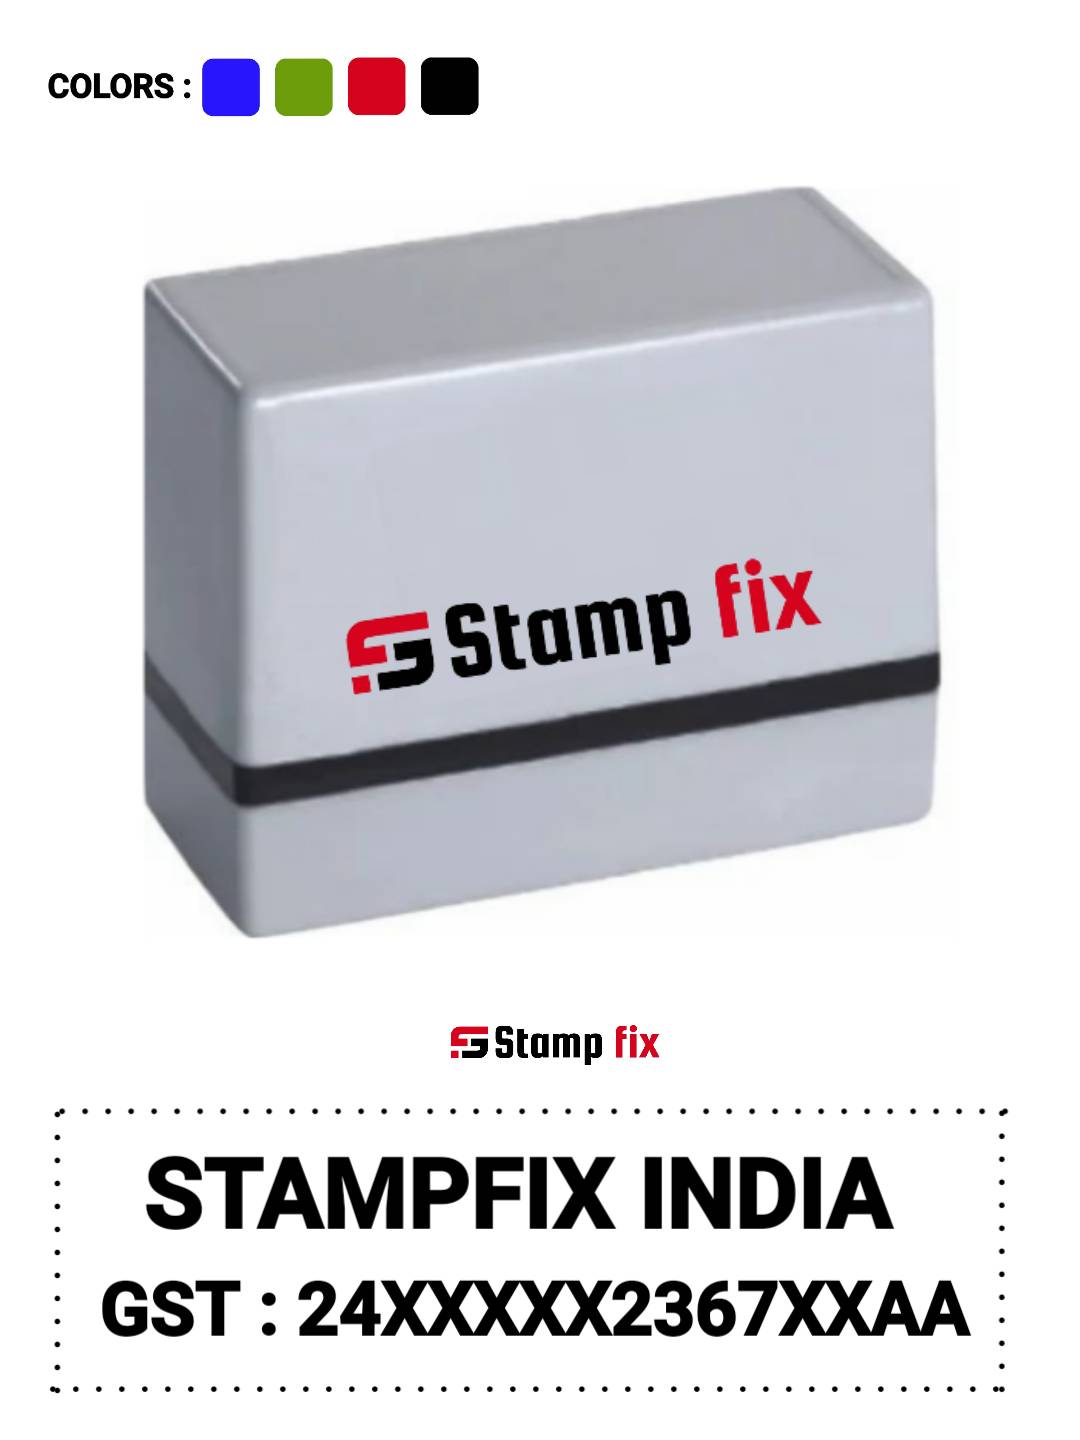 Pre Ink GST stamp, business stamp, incometax stamp, Gst logo stamp, personal stamp, executive stamp, owner stamp, director stamp, patner stamp , firm stamp, easy stamp, shop stamp, business marking stamp, Stamp by StampFix, a self-inking stamp with high-quality impressions
in India, nylon stamp, rubber stamp, pre ink stamp, polymer stamp, urgent stamp